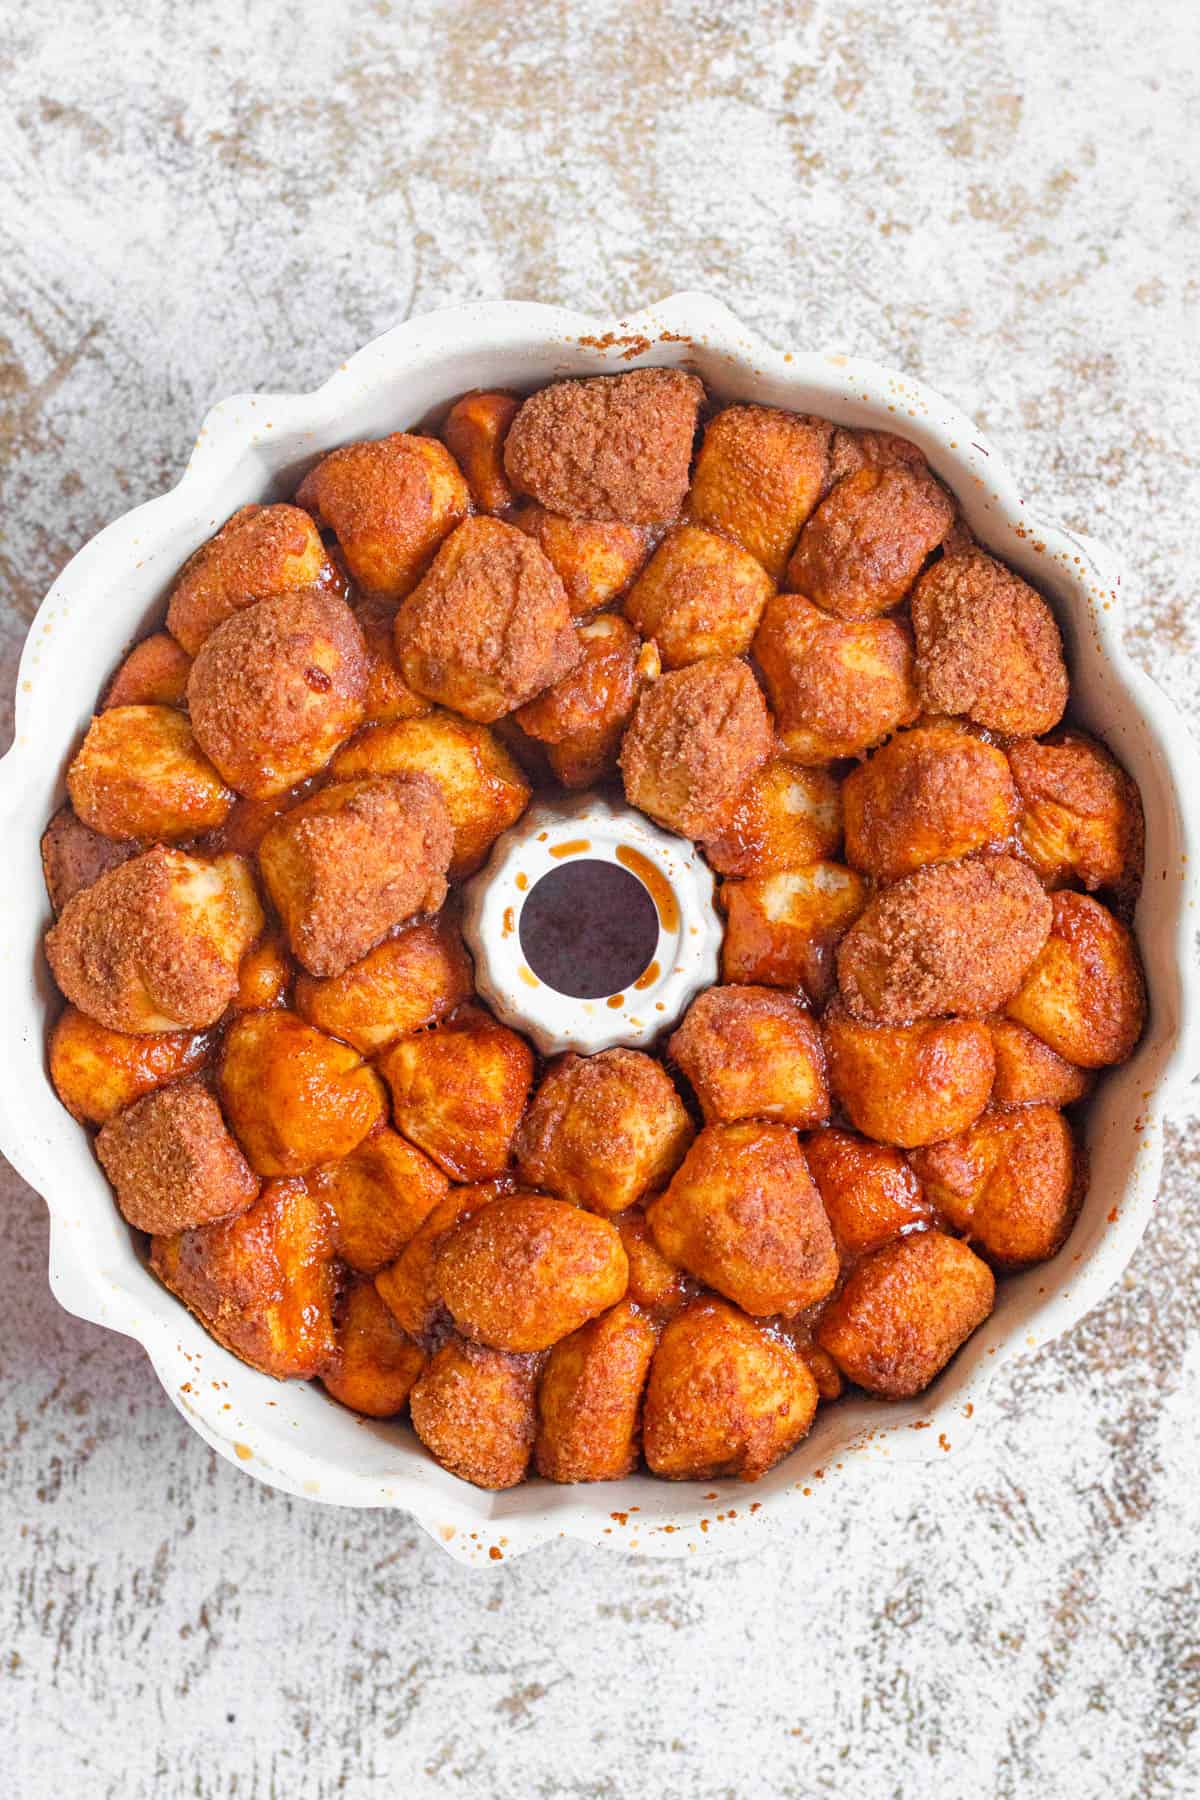 Freshly baked monkey bread in a bundt pan with caramelized cinnamon sugar a golden brown on the top. 